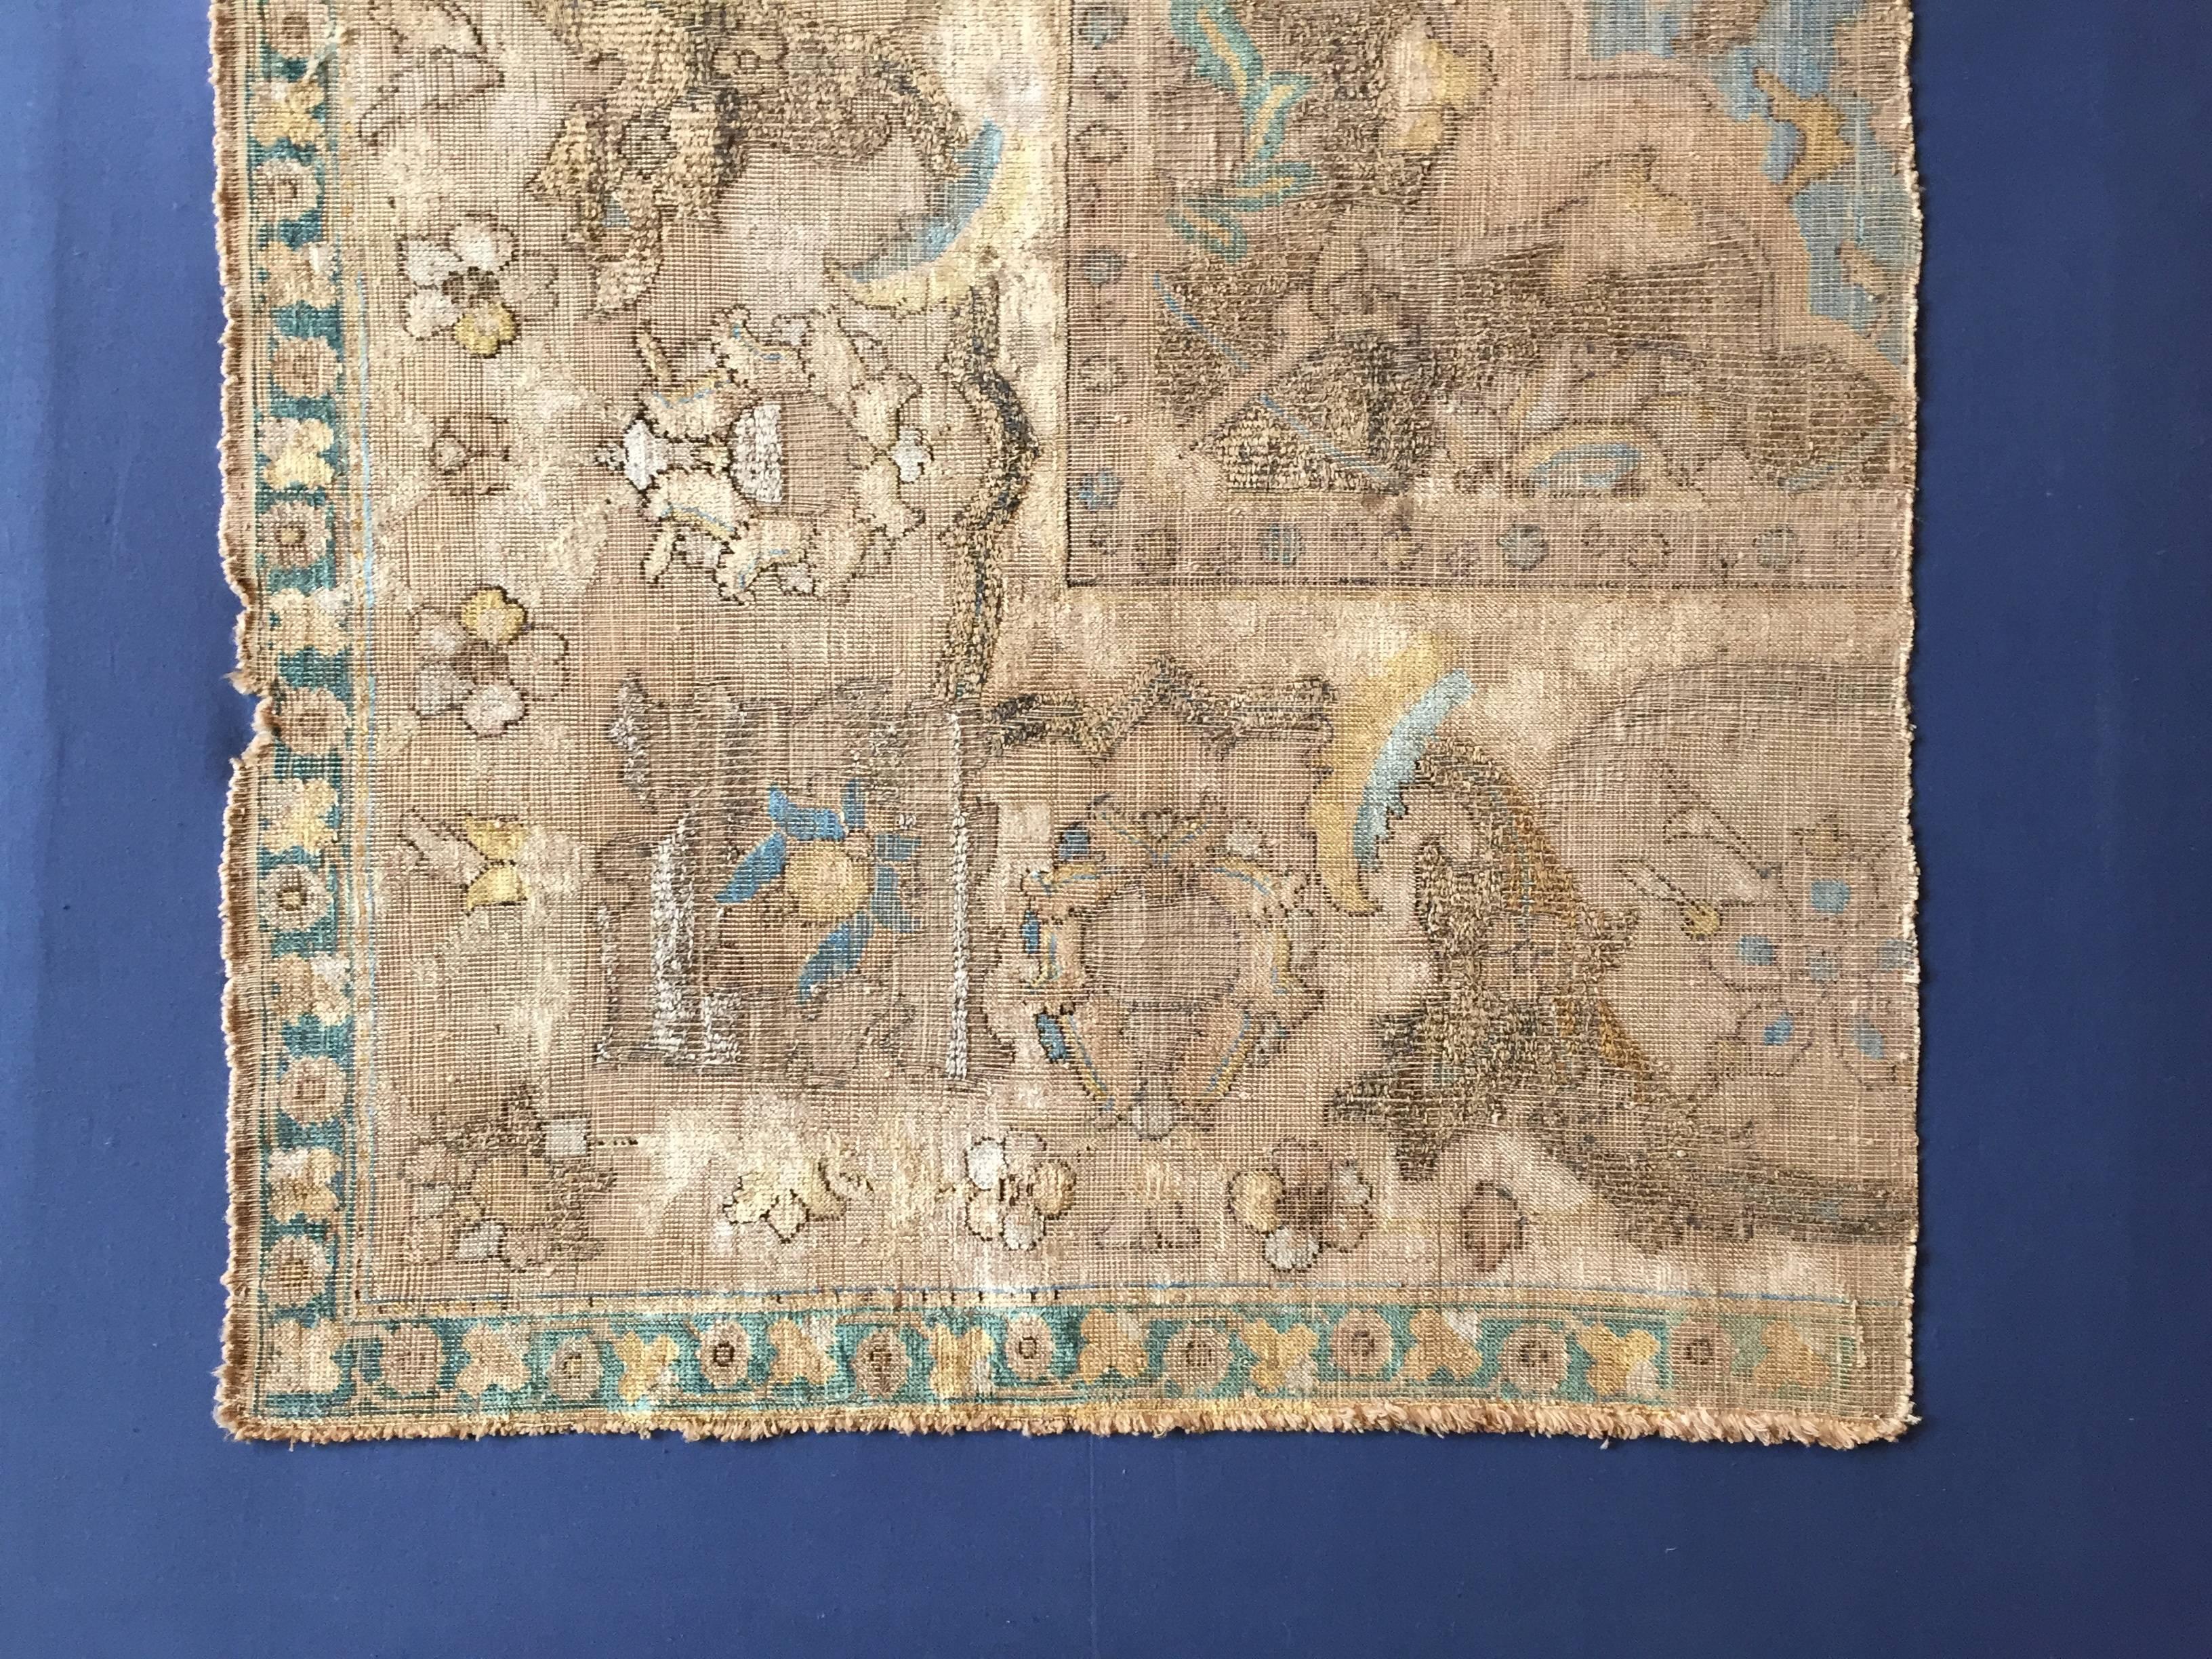 Hand-Knotted 17th Century Blue Gold Wool Silk Gilded Silver Fragment Polonaise Rug, ca 1650s